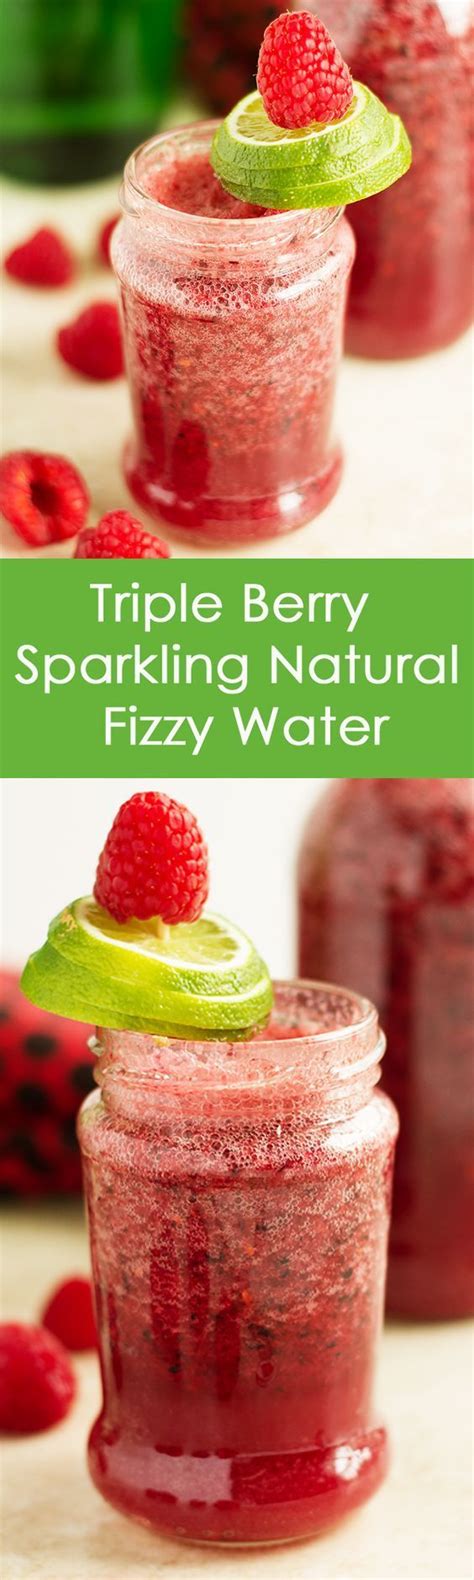 triple berry sparkling natural fizzy water recipe ilona s passion sparkling drinks